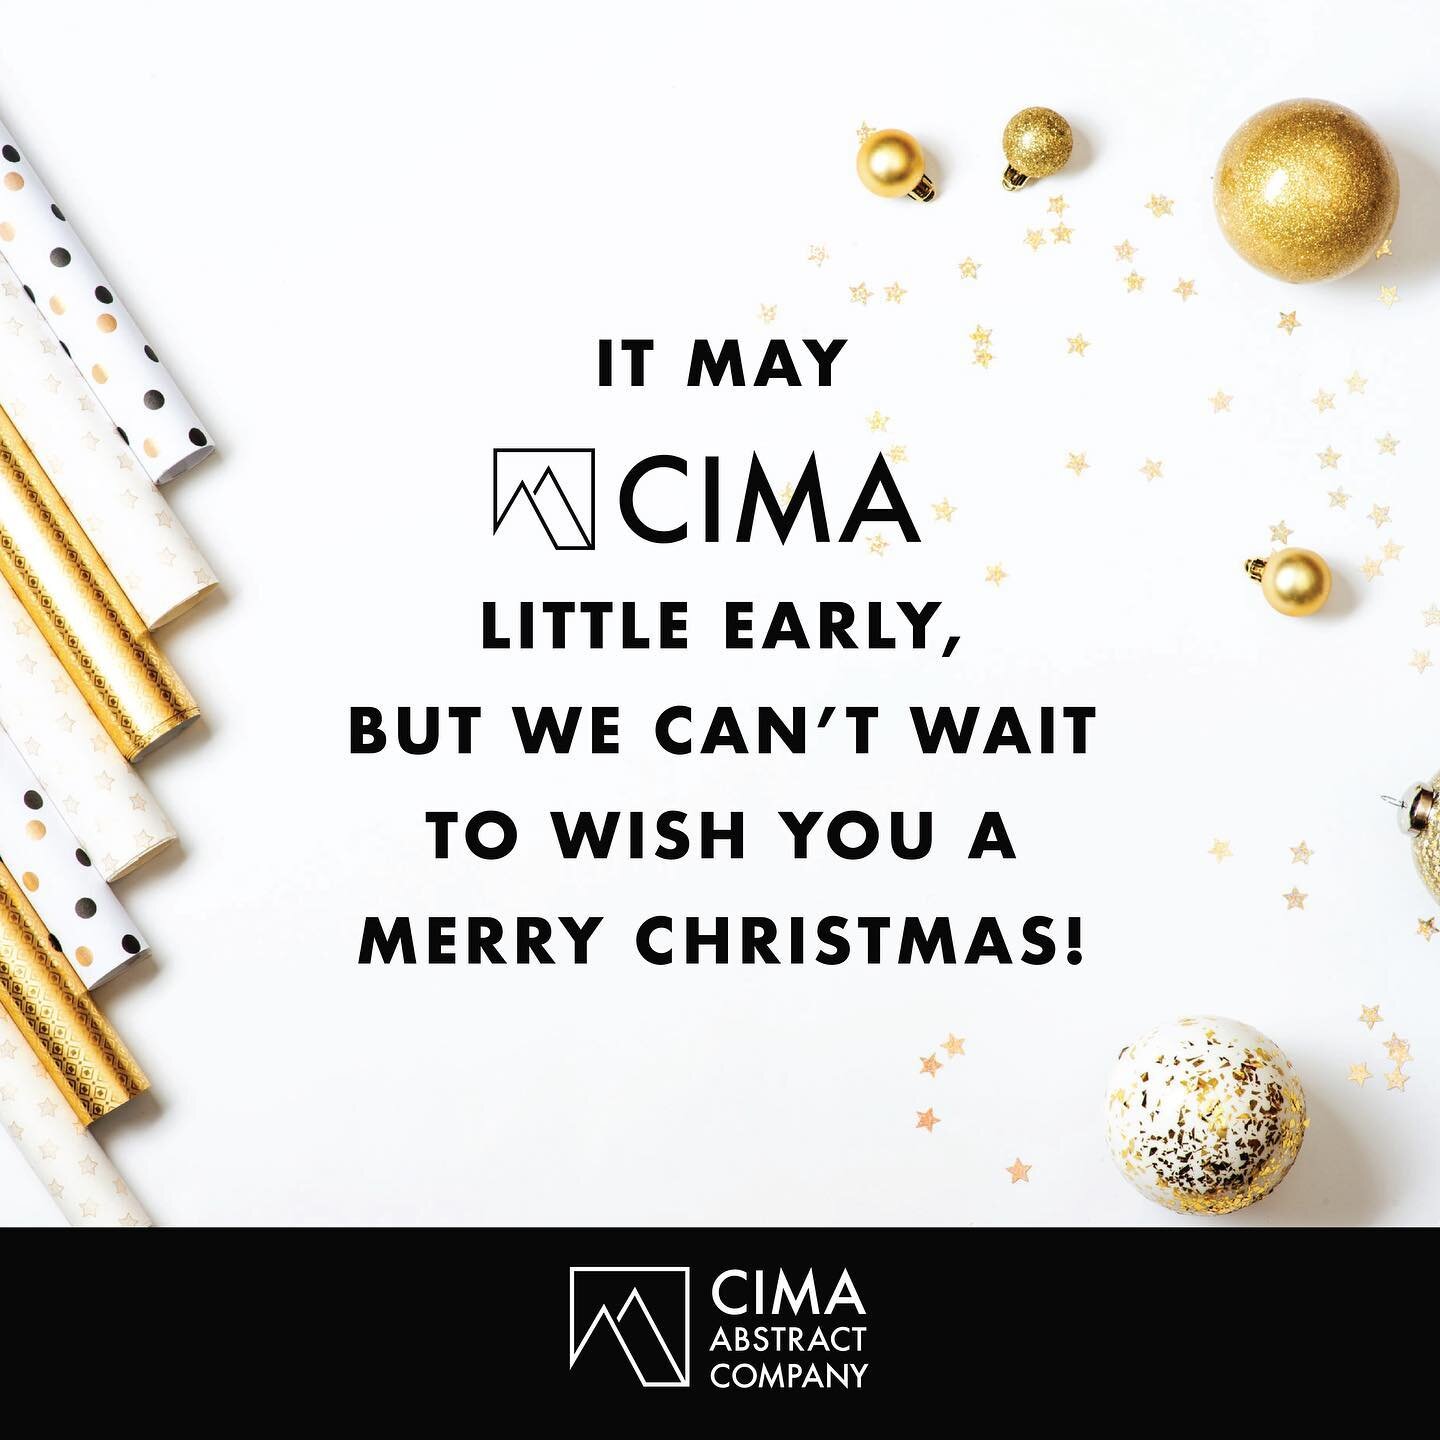 Merry Christmas from our Cima family to yours! We wish you a happy and healthy holiday! #Cima #Comanche #titleinsurance #happyholidays